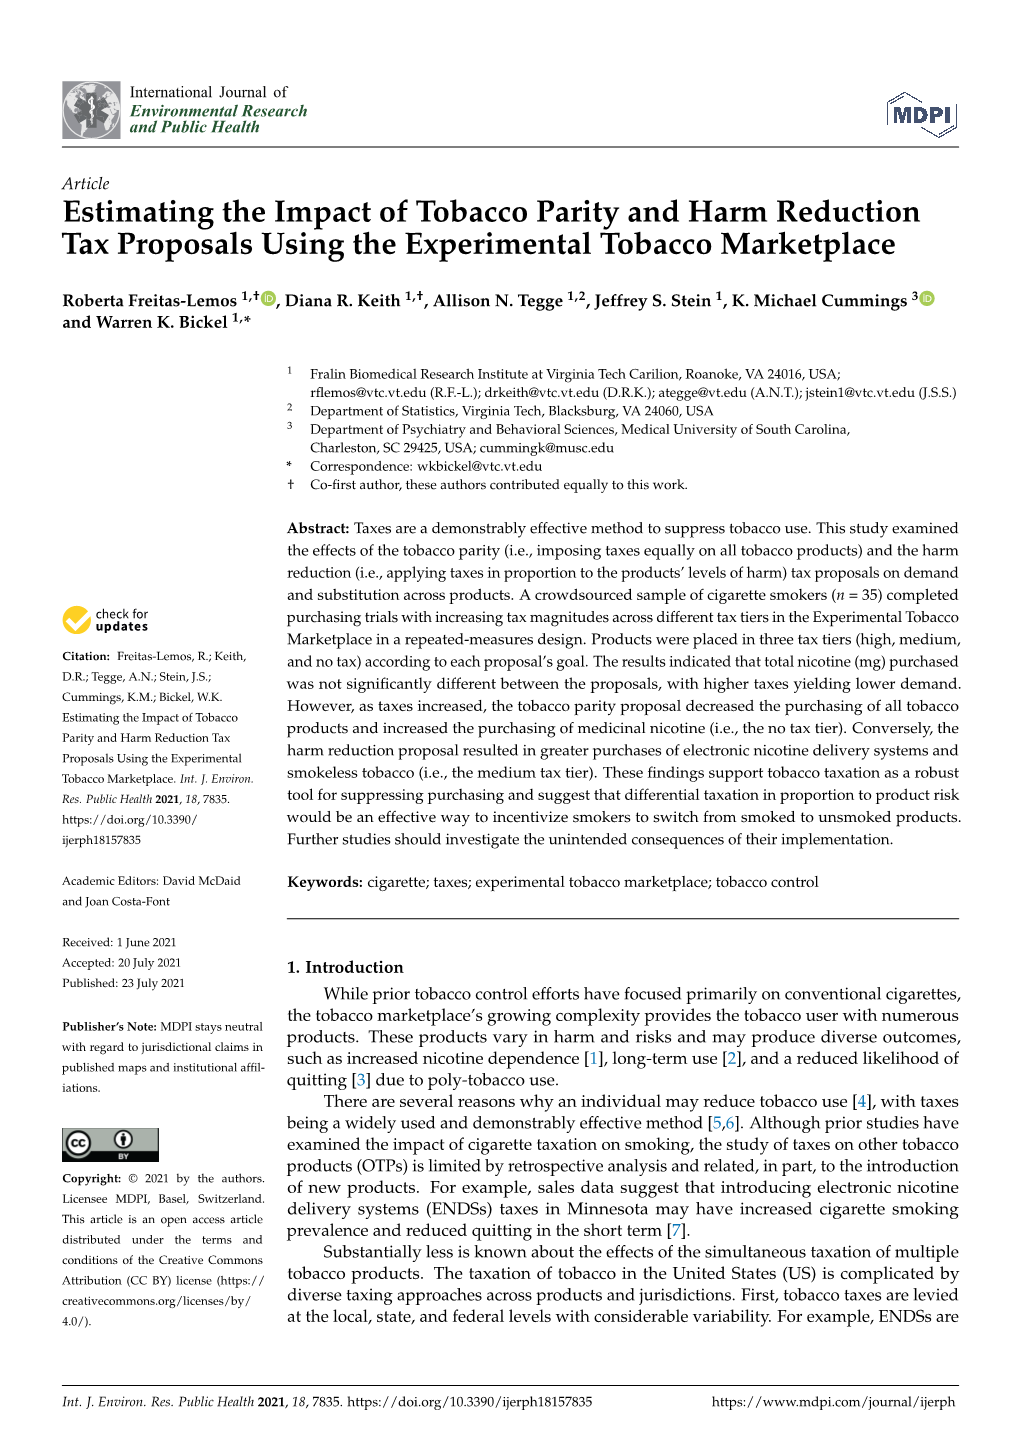 Estimating the Impact of Tobacco Parity and Harm Reduction Tax Proposals Using the Experimental Tobacco Marketplace